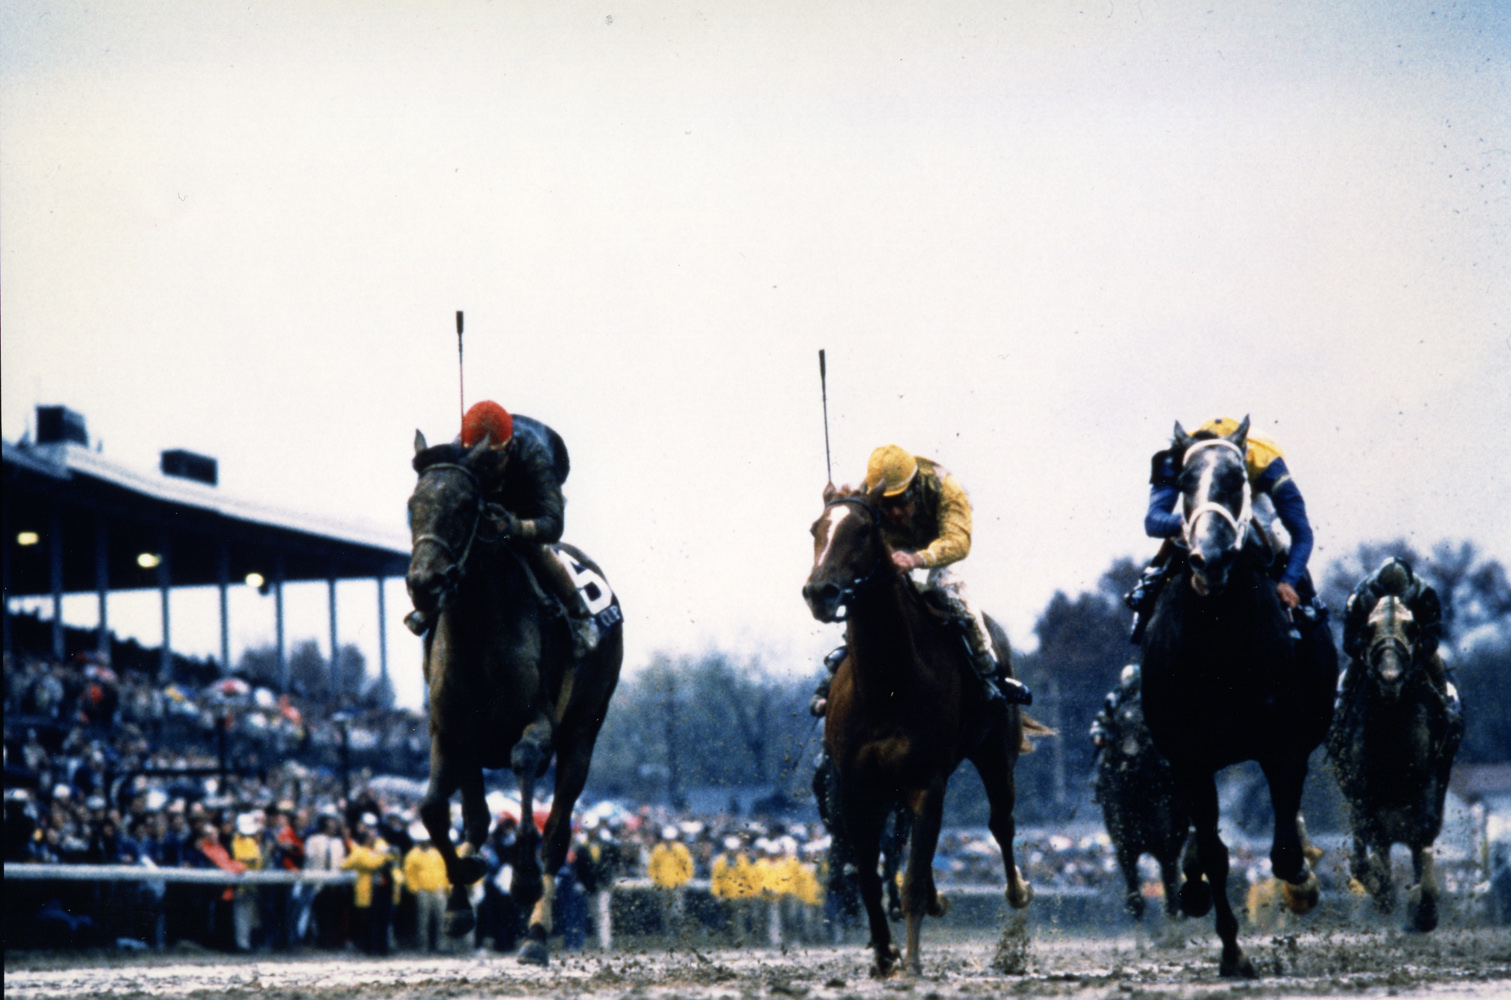 Personal Ensign (Randy Romero up) charging down the stretch to win the 1988 Breeders' Cup Distaff at Churchill Downs (Breeders' Cup Photo/Museum Collection)